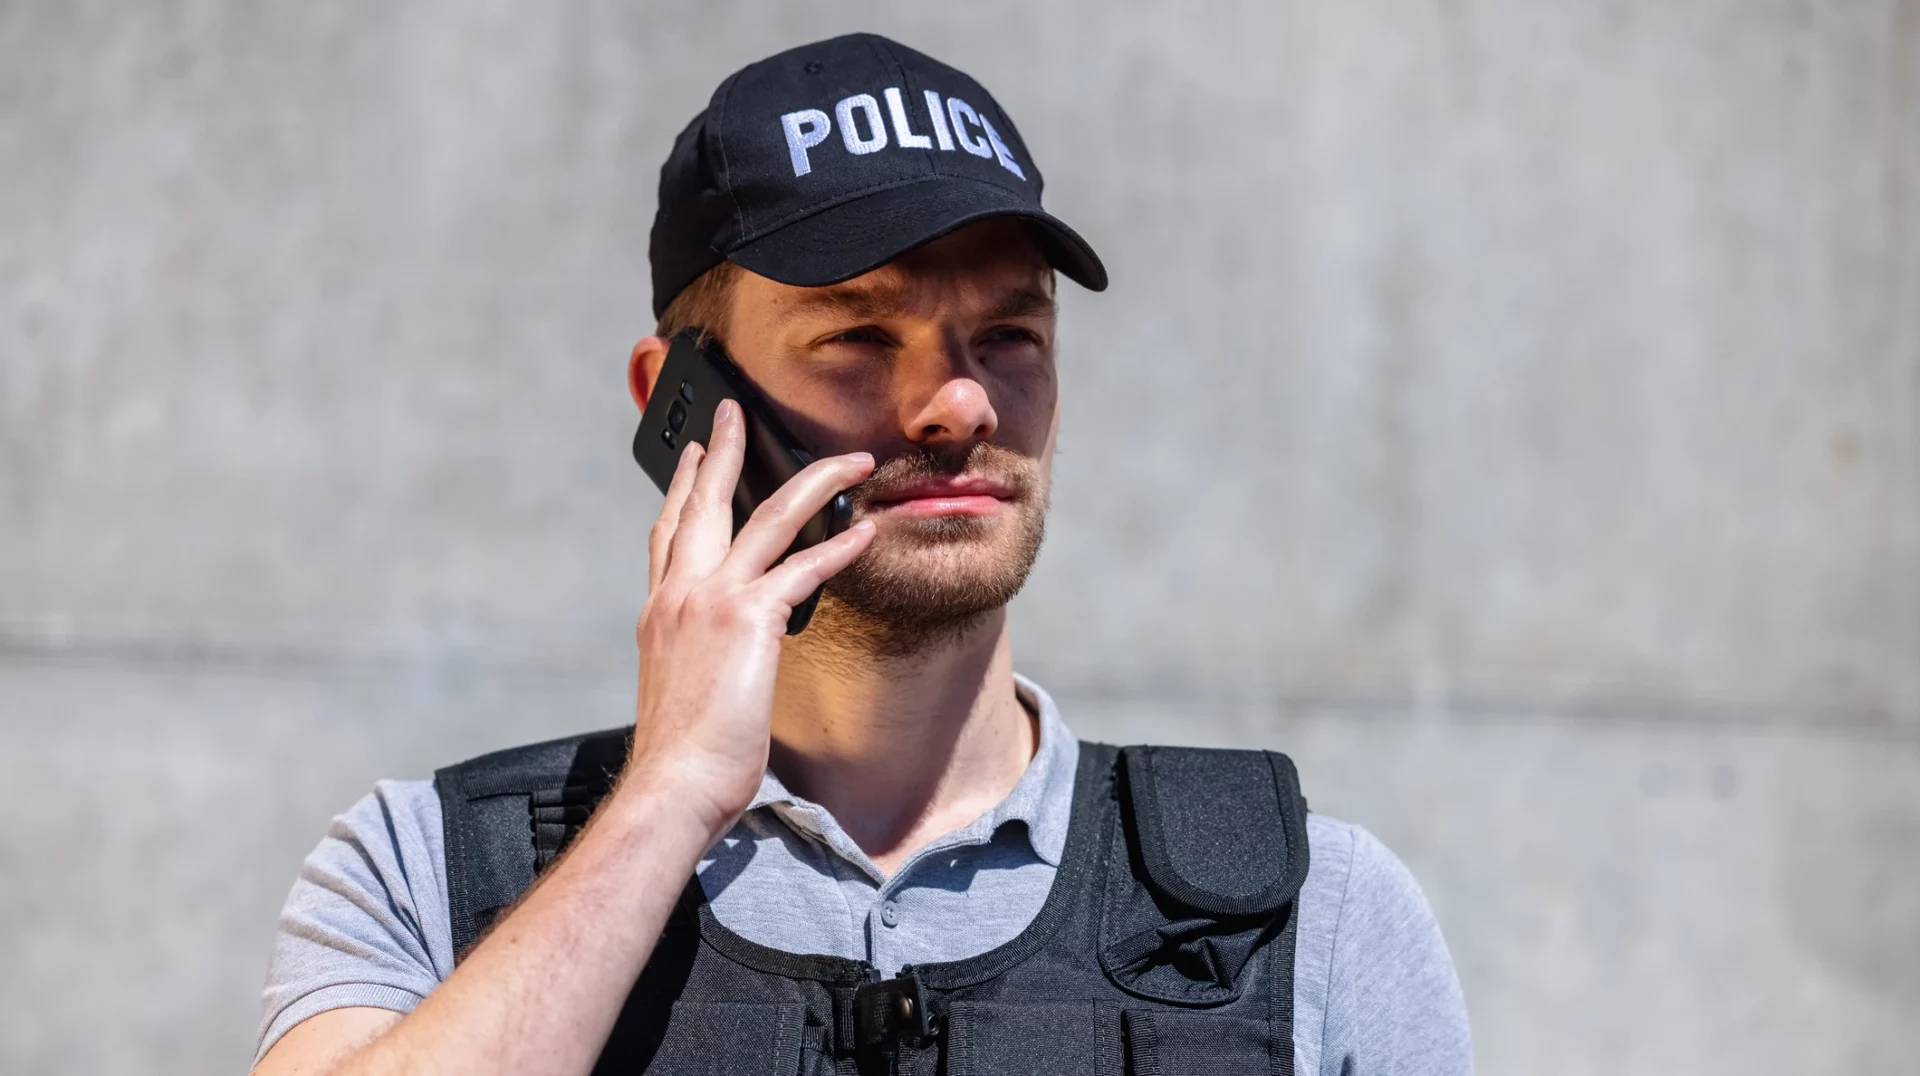 police calling on phone